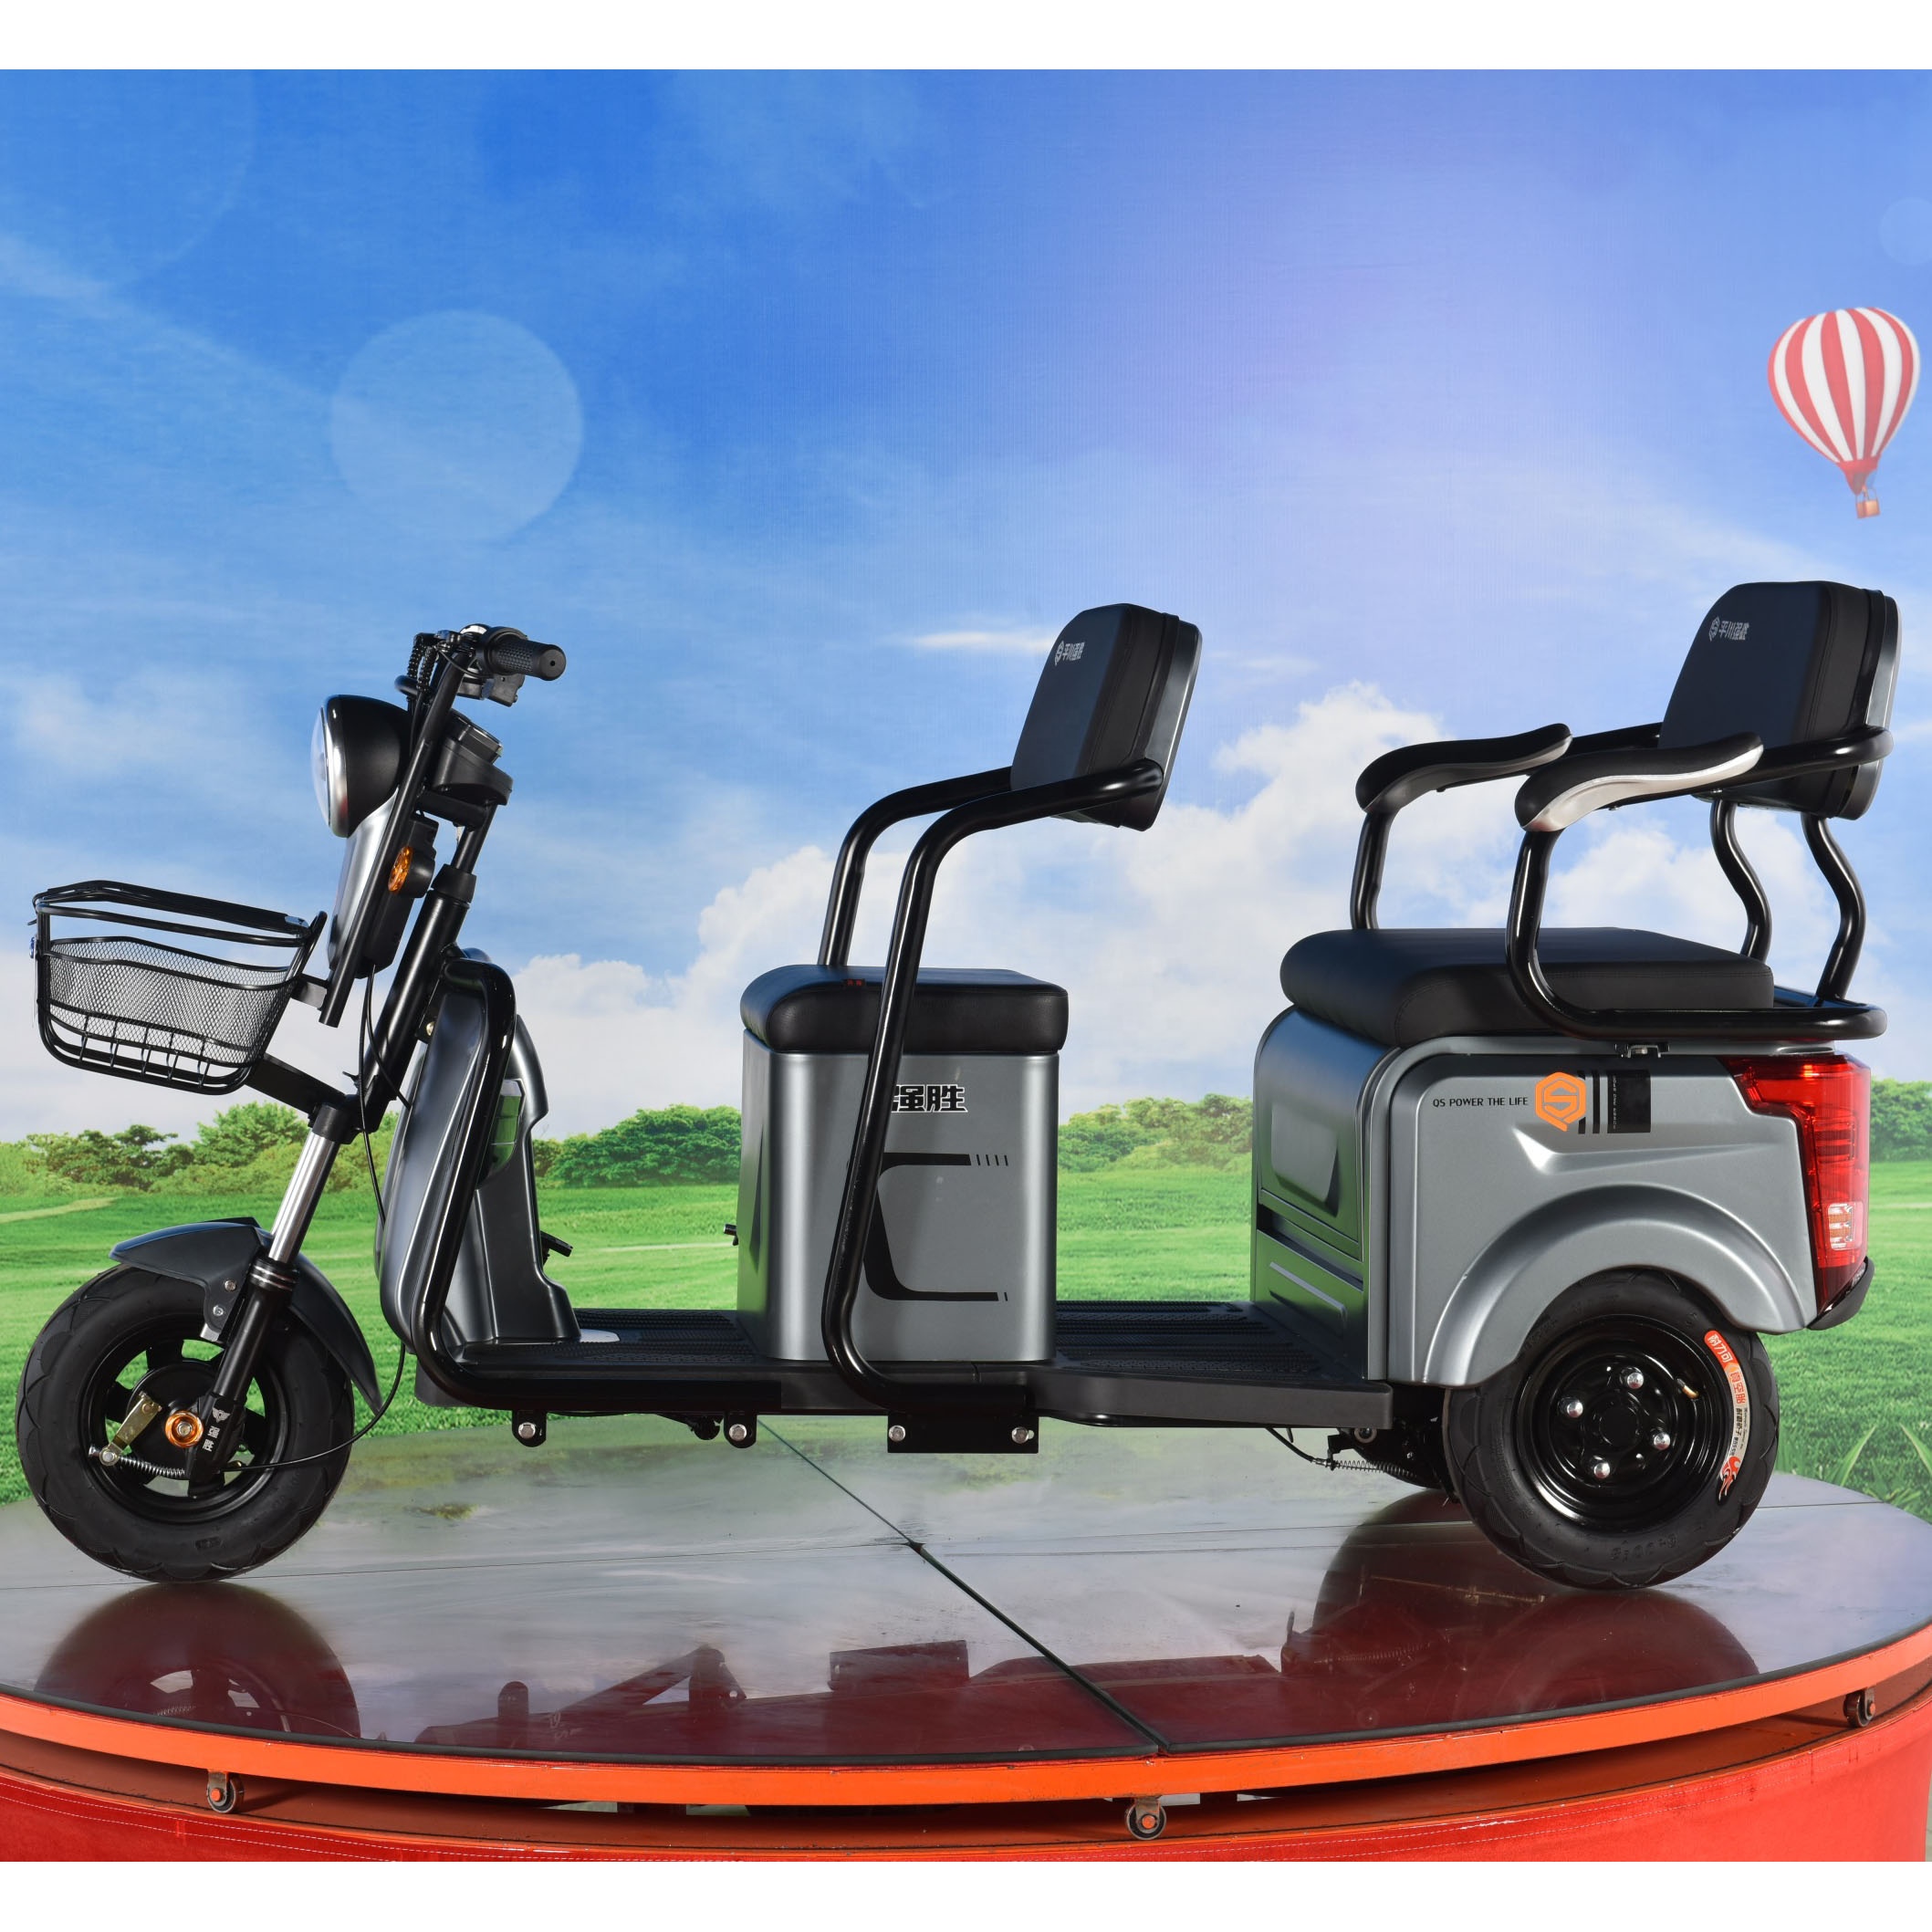 China Wholesale Battery Rickshaw Manufactures Factories - High quality small rickshaw tuk tuk 2 seater electric tricycle cheap price – Qiangsheng